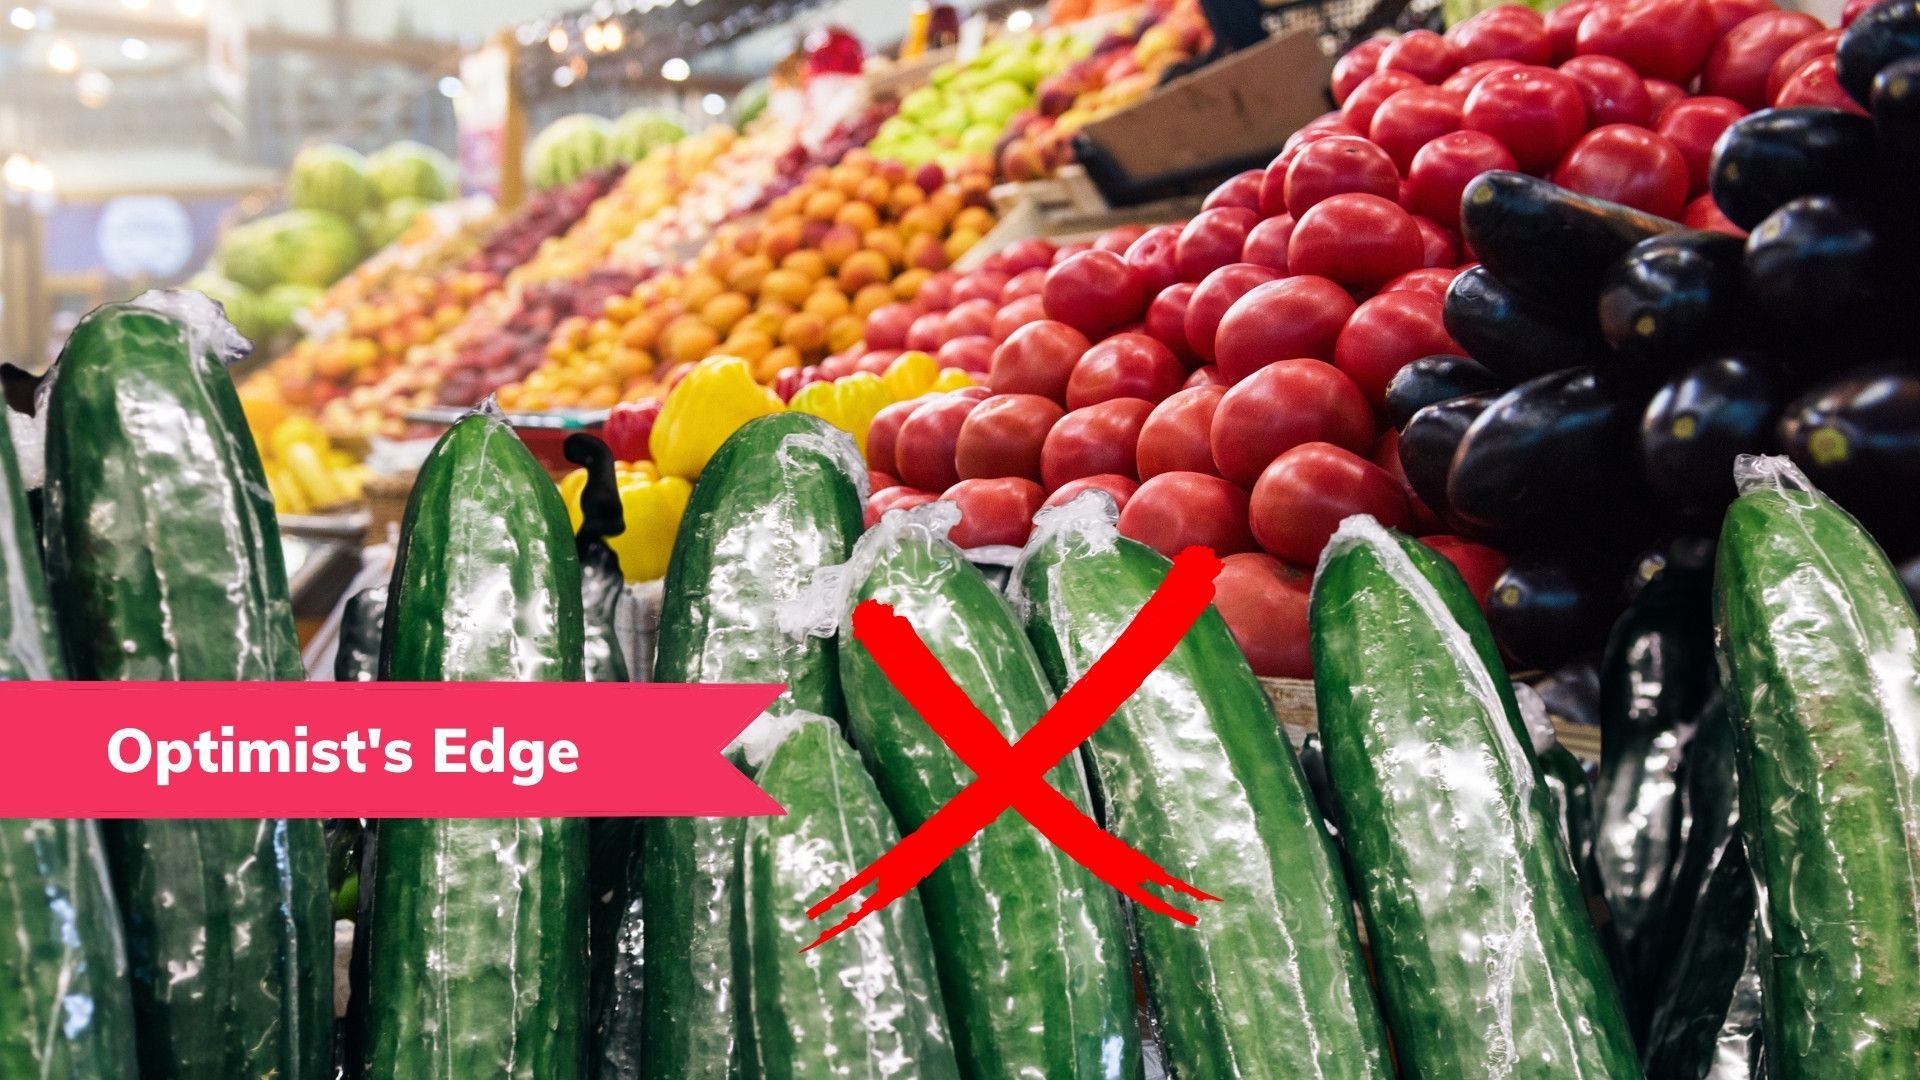 💡 Optimist's Edge: Fruit and vegetables without plastic